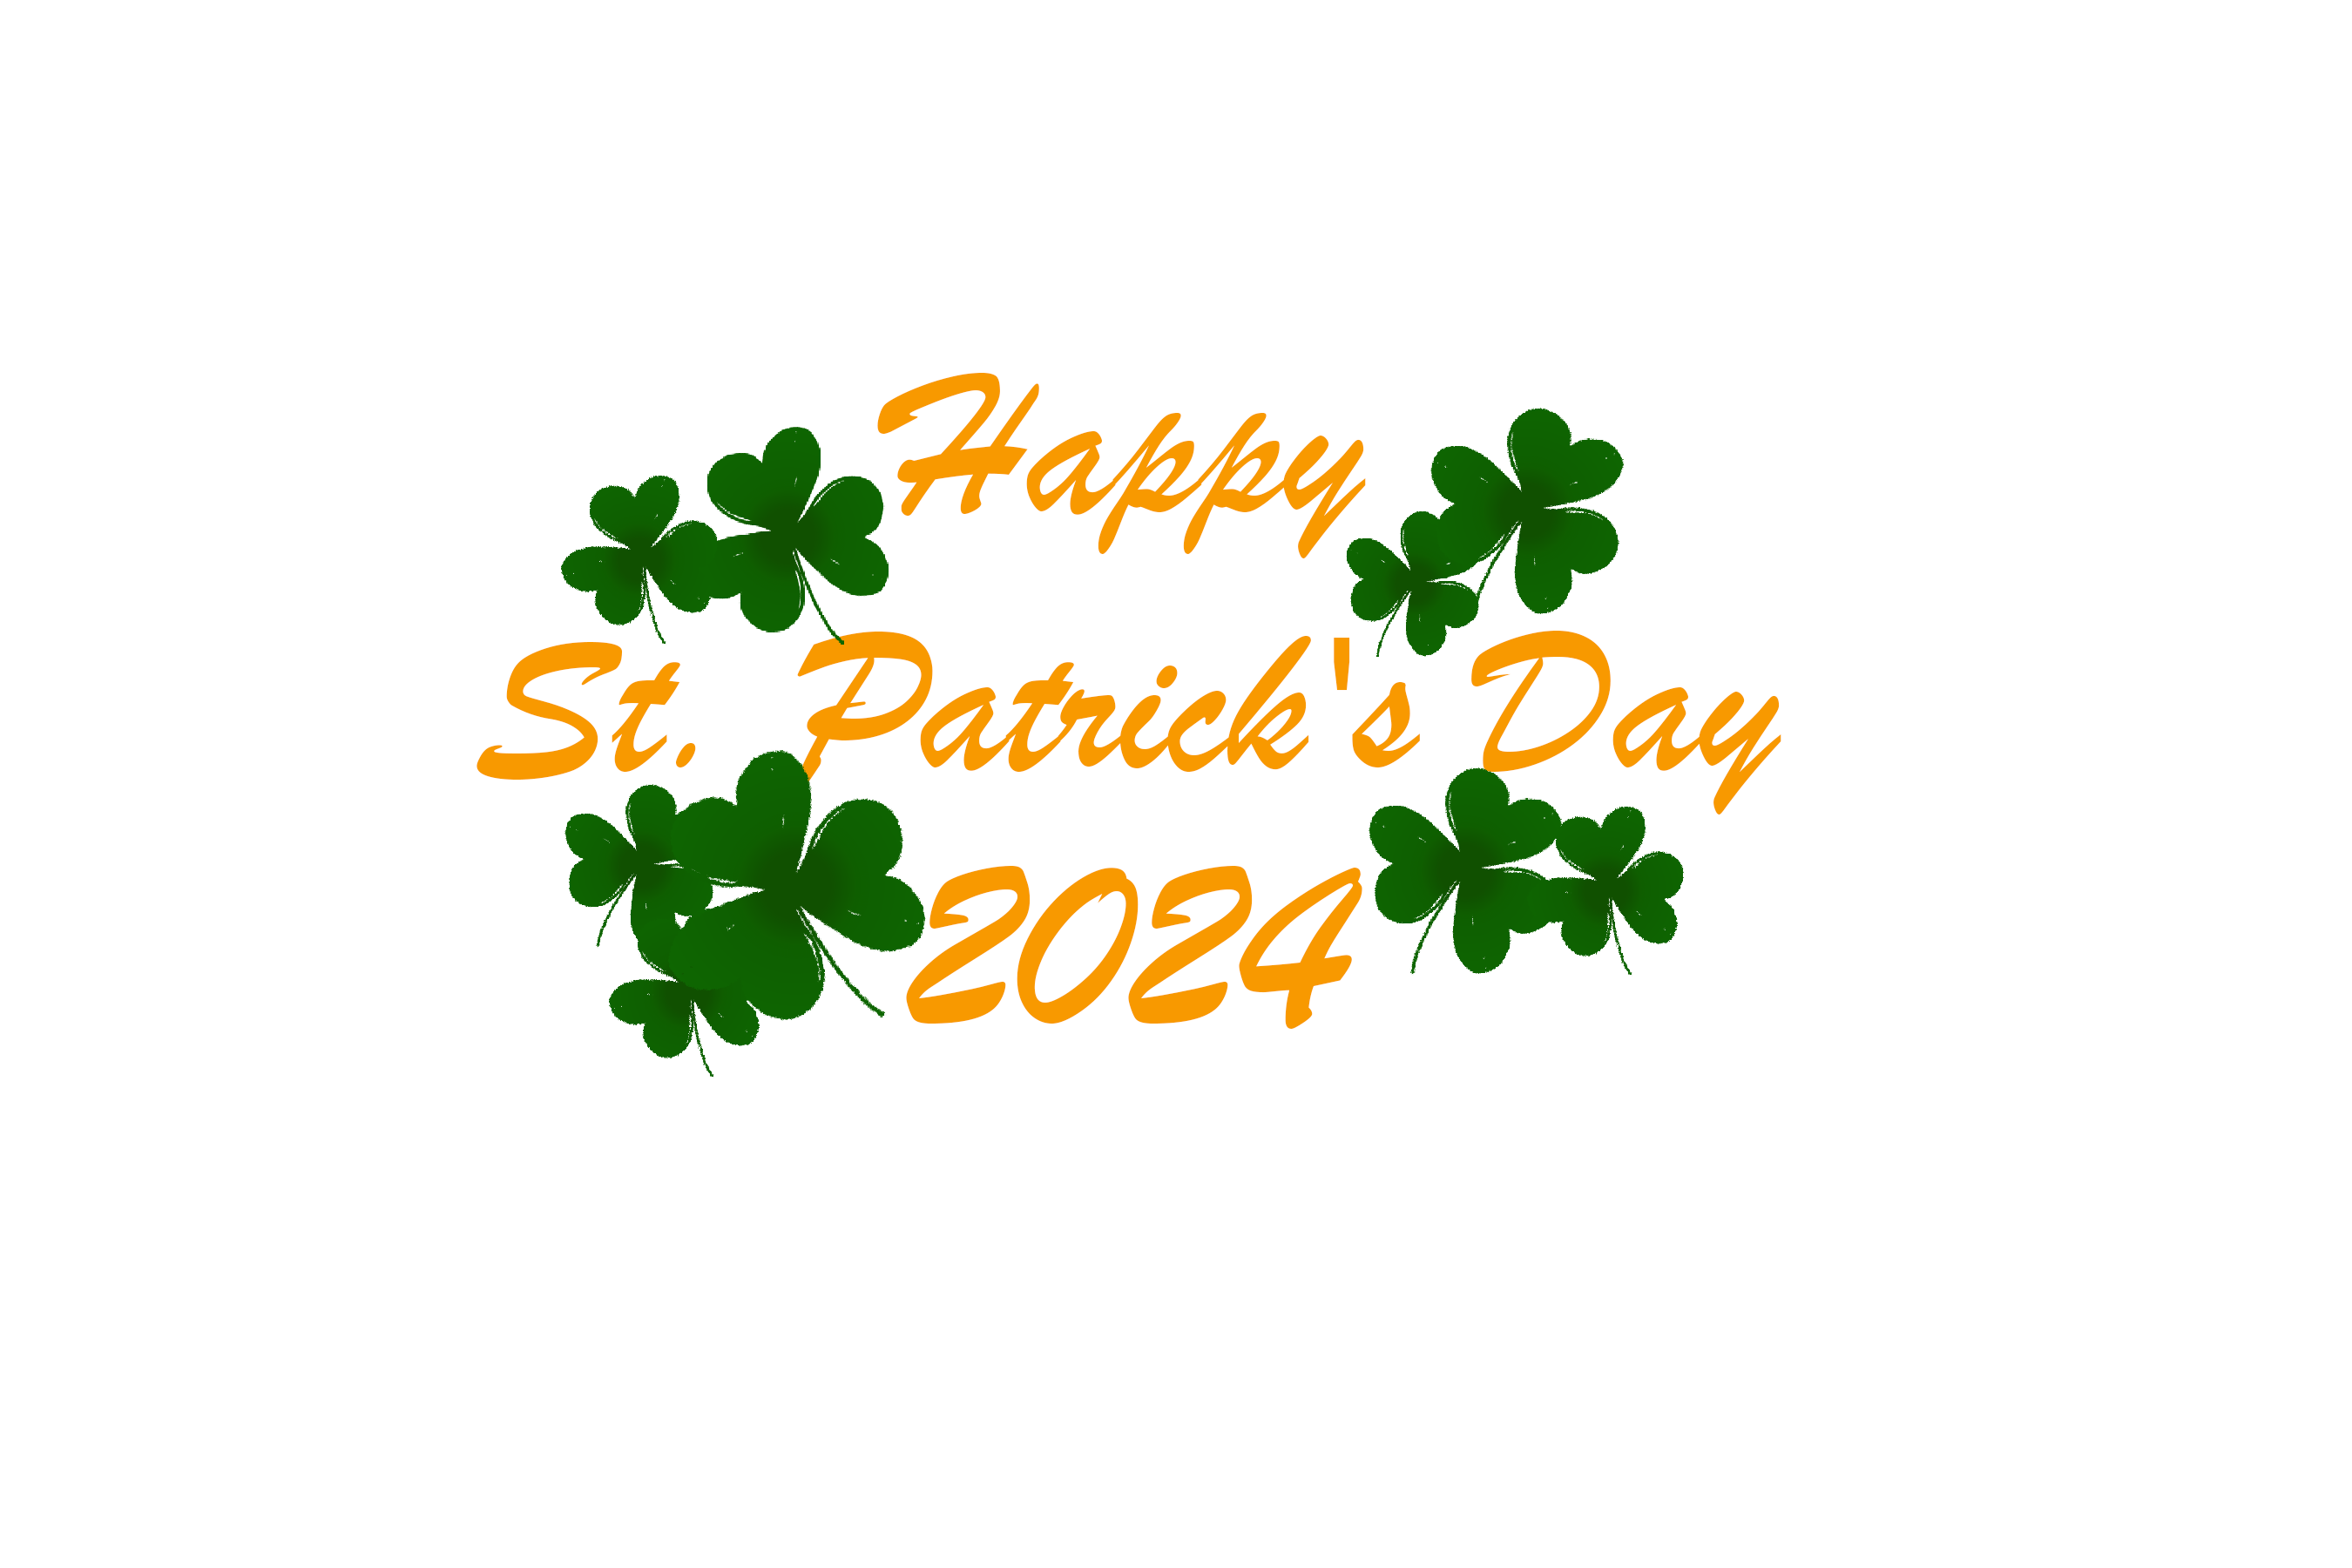 St. Patrick's day 2024 wishes PNG